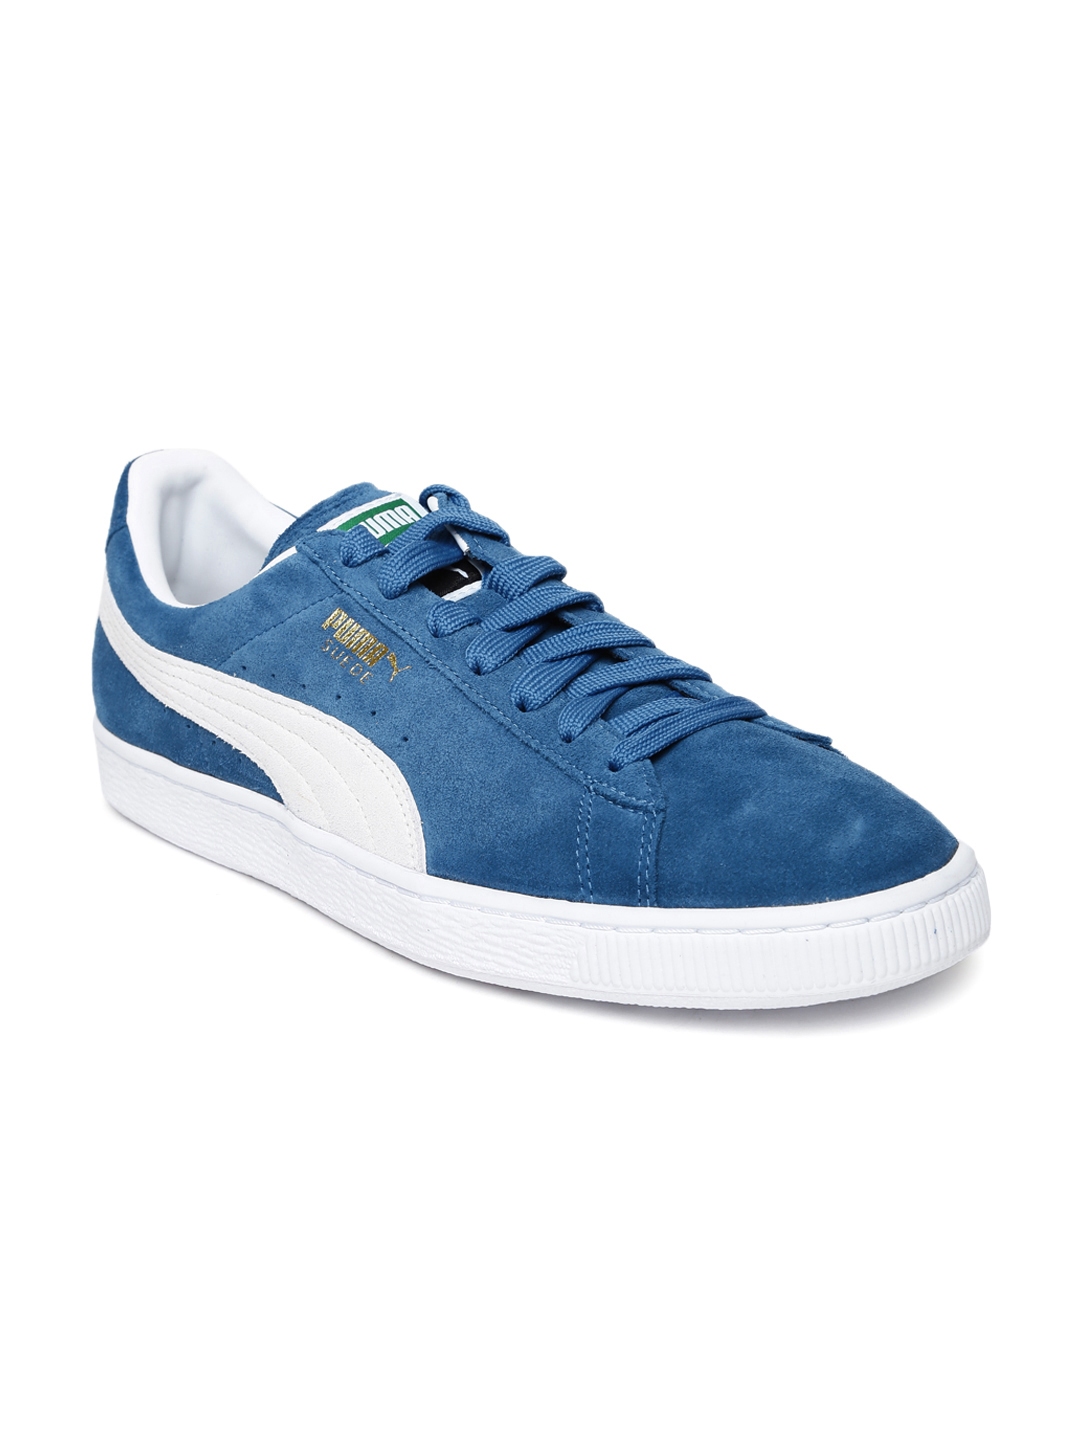 Buy Puma Men Blue Solid Suede Sneakers - Casual Shoes for Men 1450951 ...